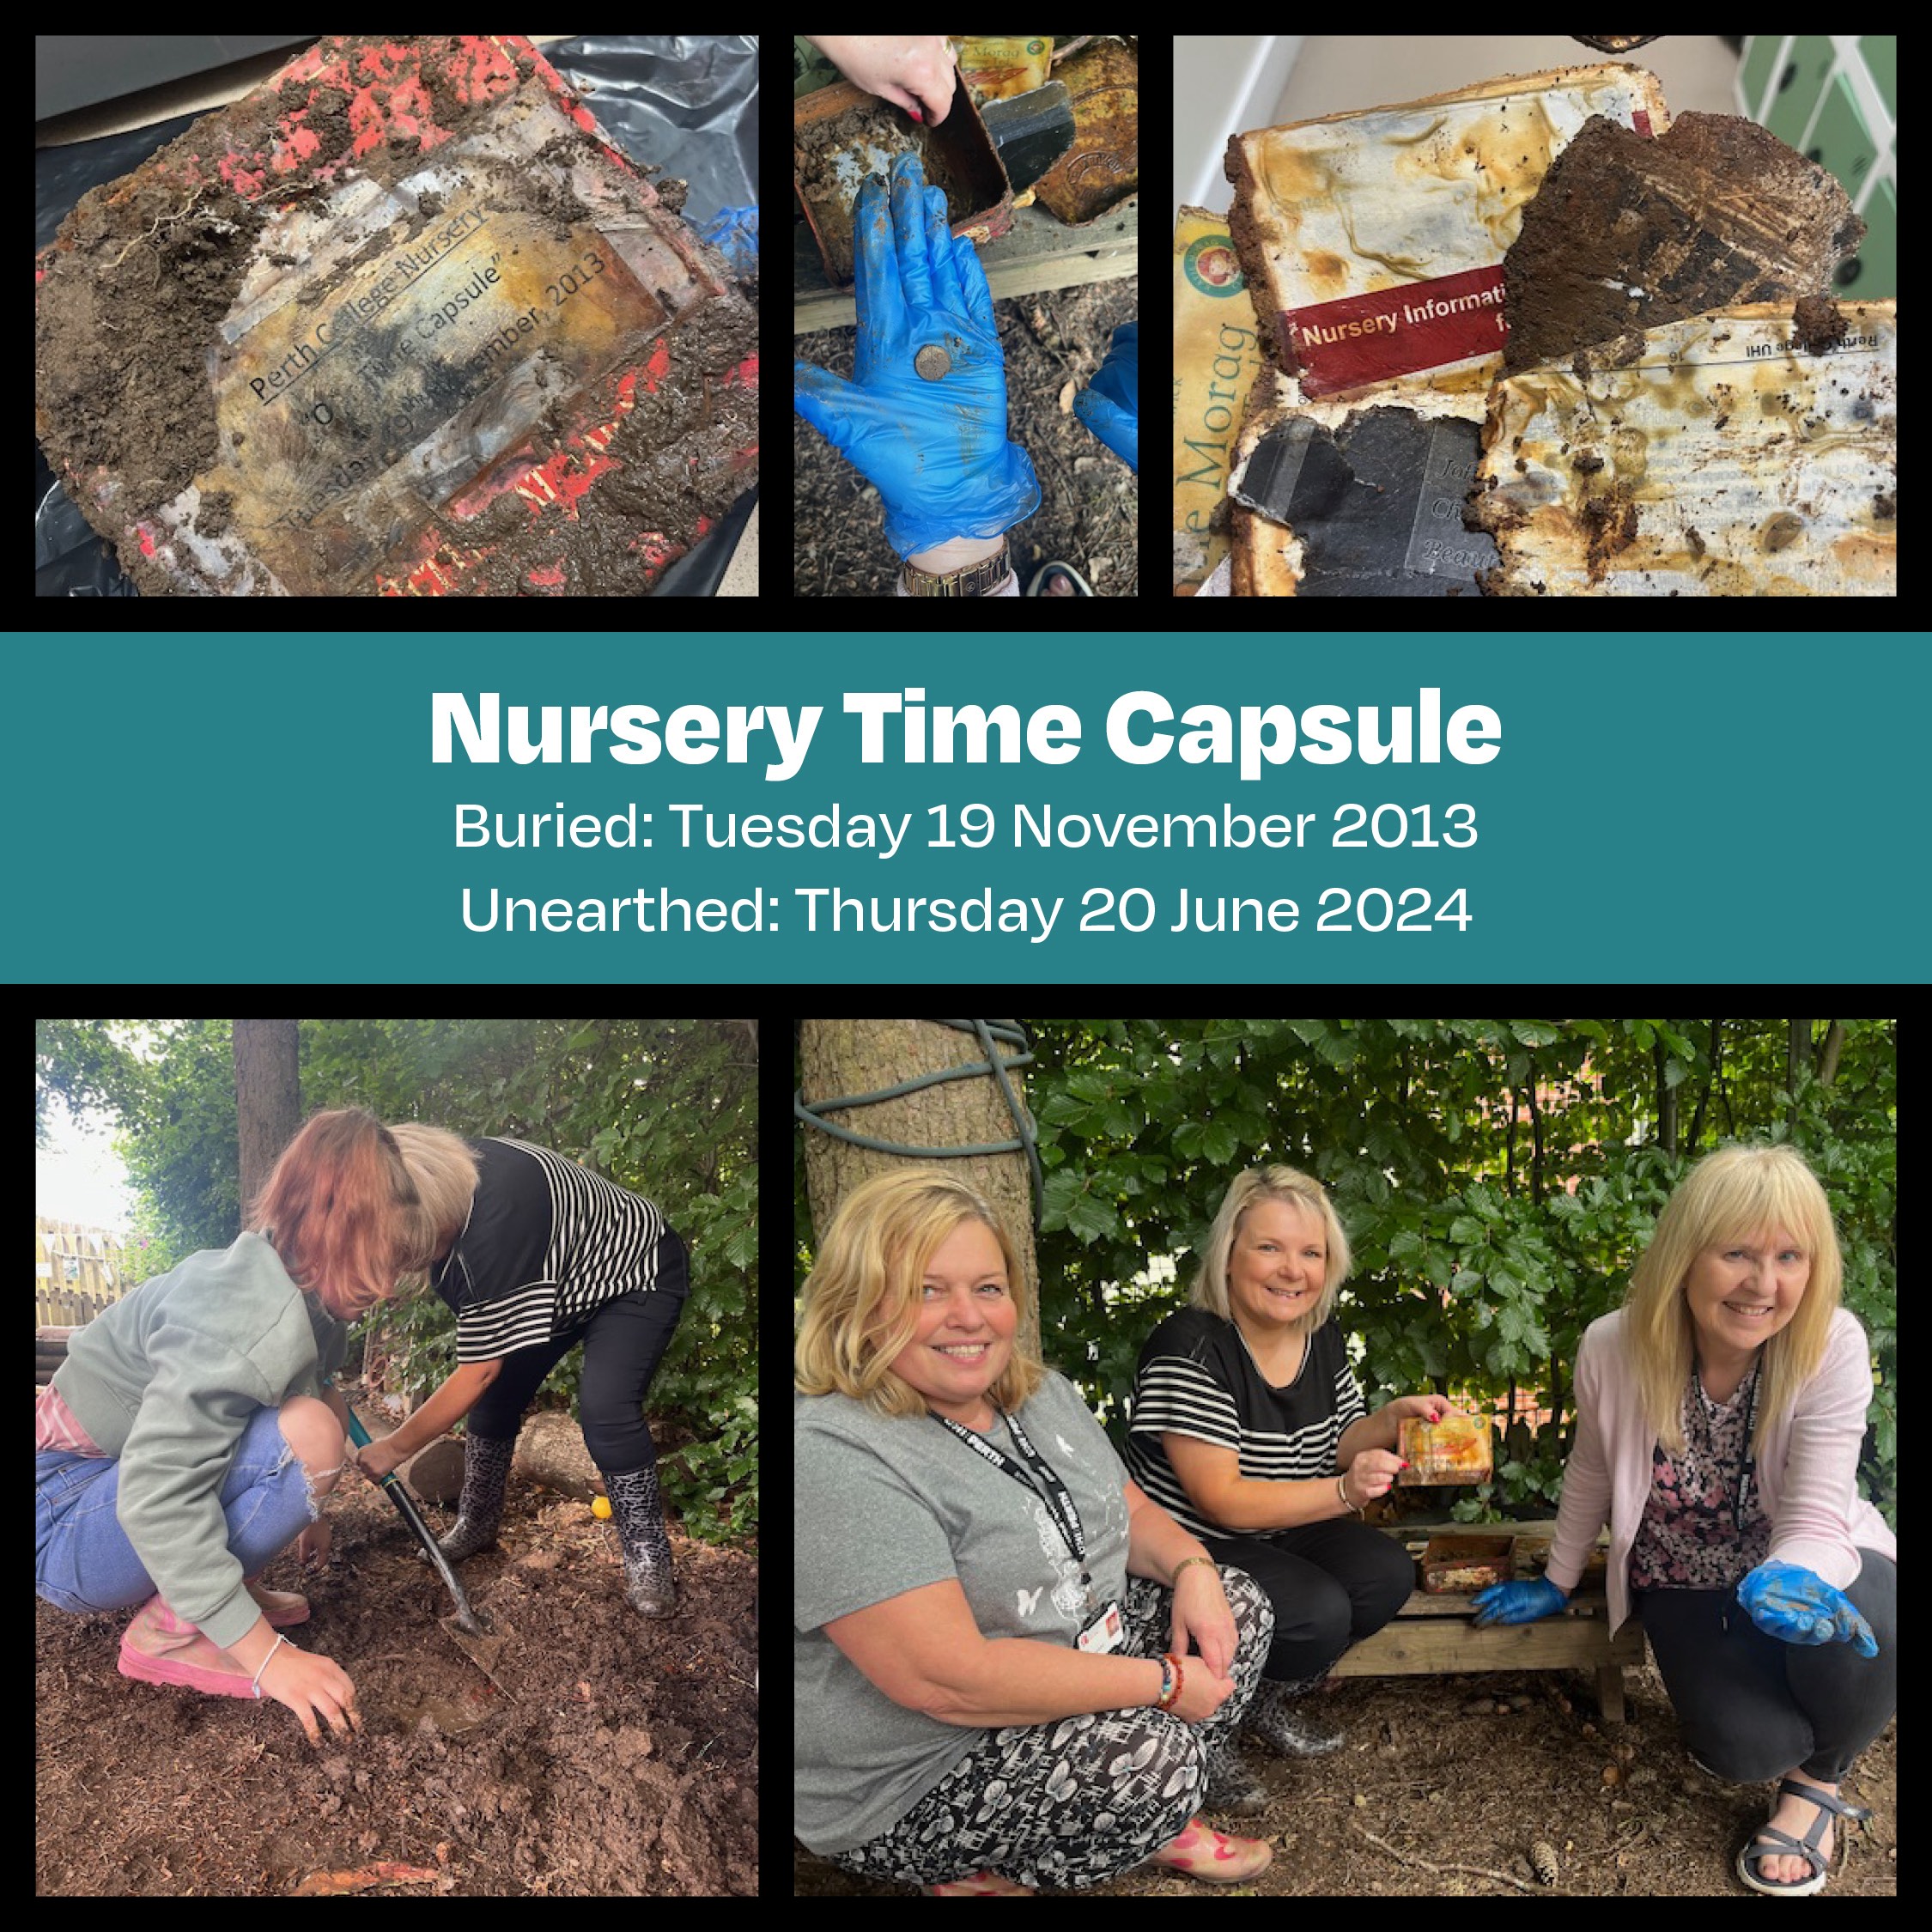 Time capsule unearthed in nursery garden